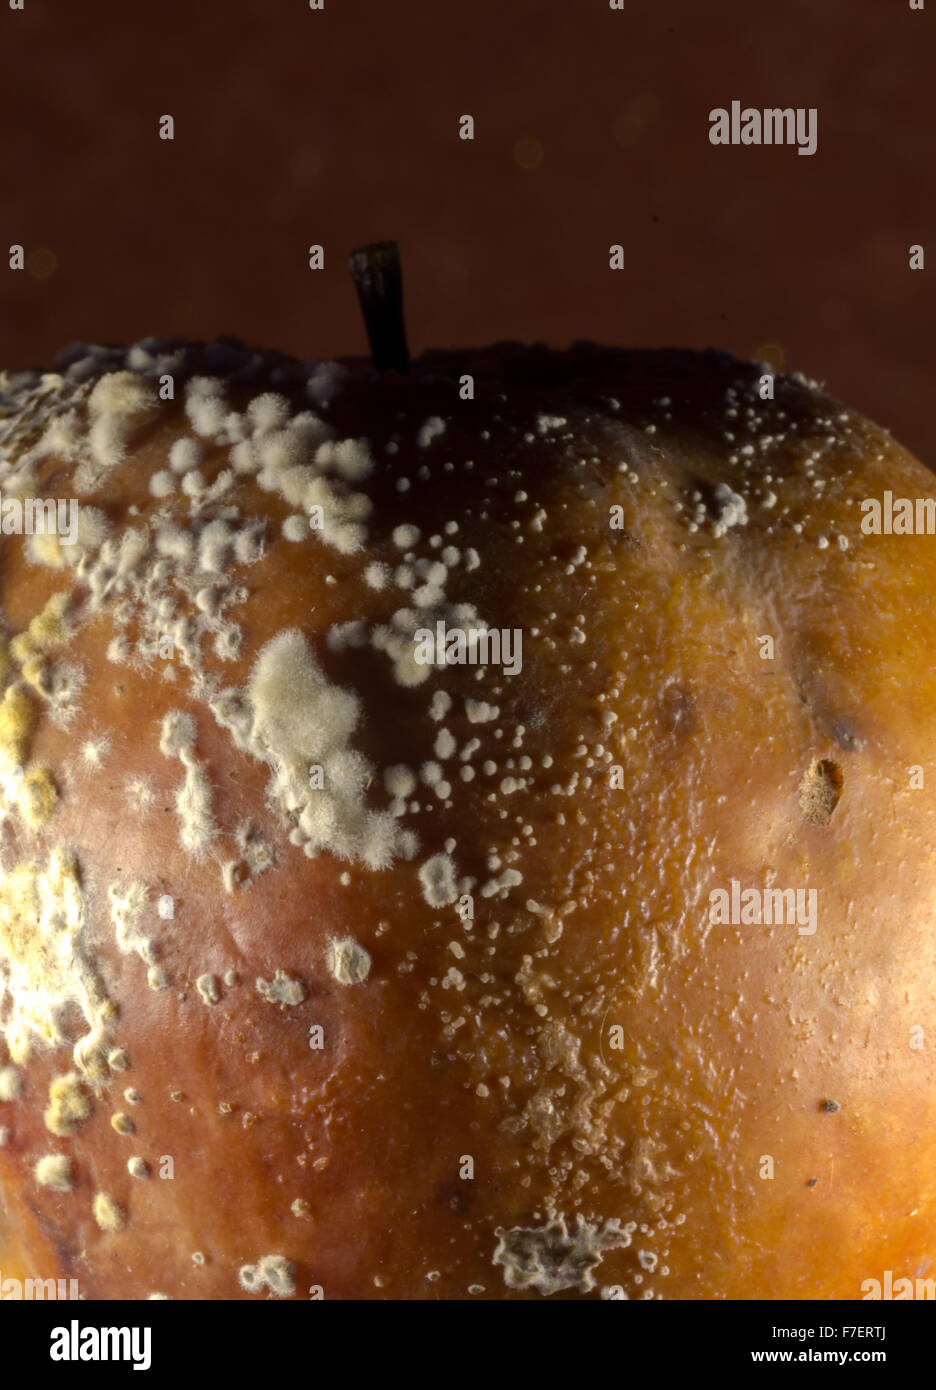 Penicillium expansum growing on the skin of an old rotting apple, often called fruit-rot. This fungal growth is the bane of all Stock Photo